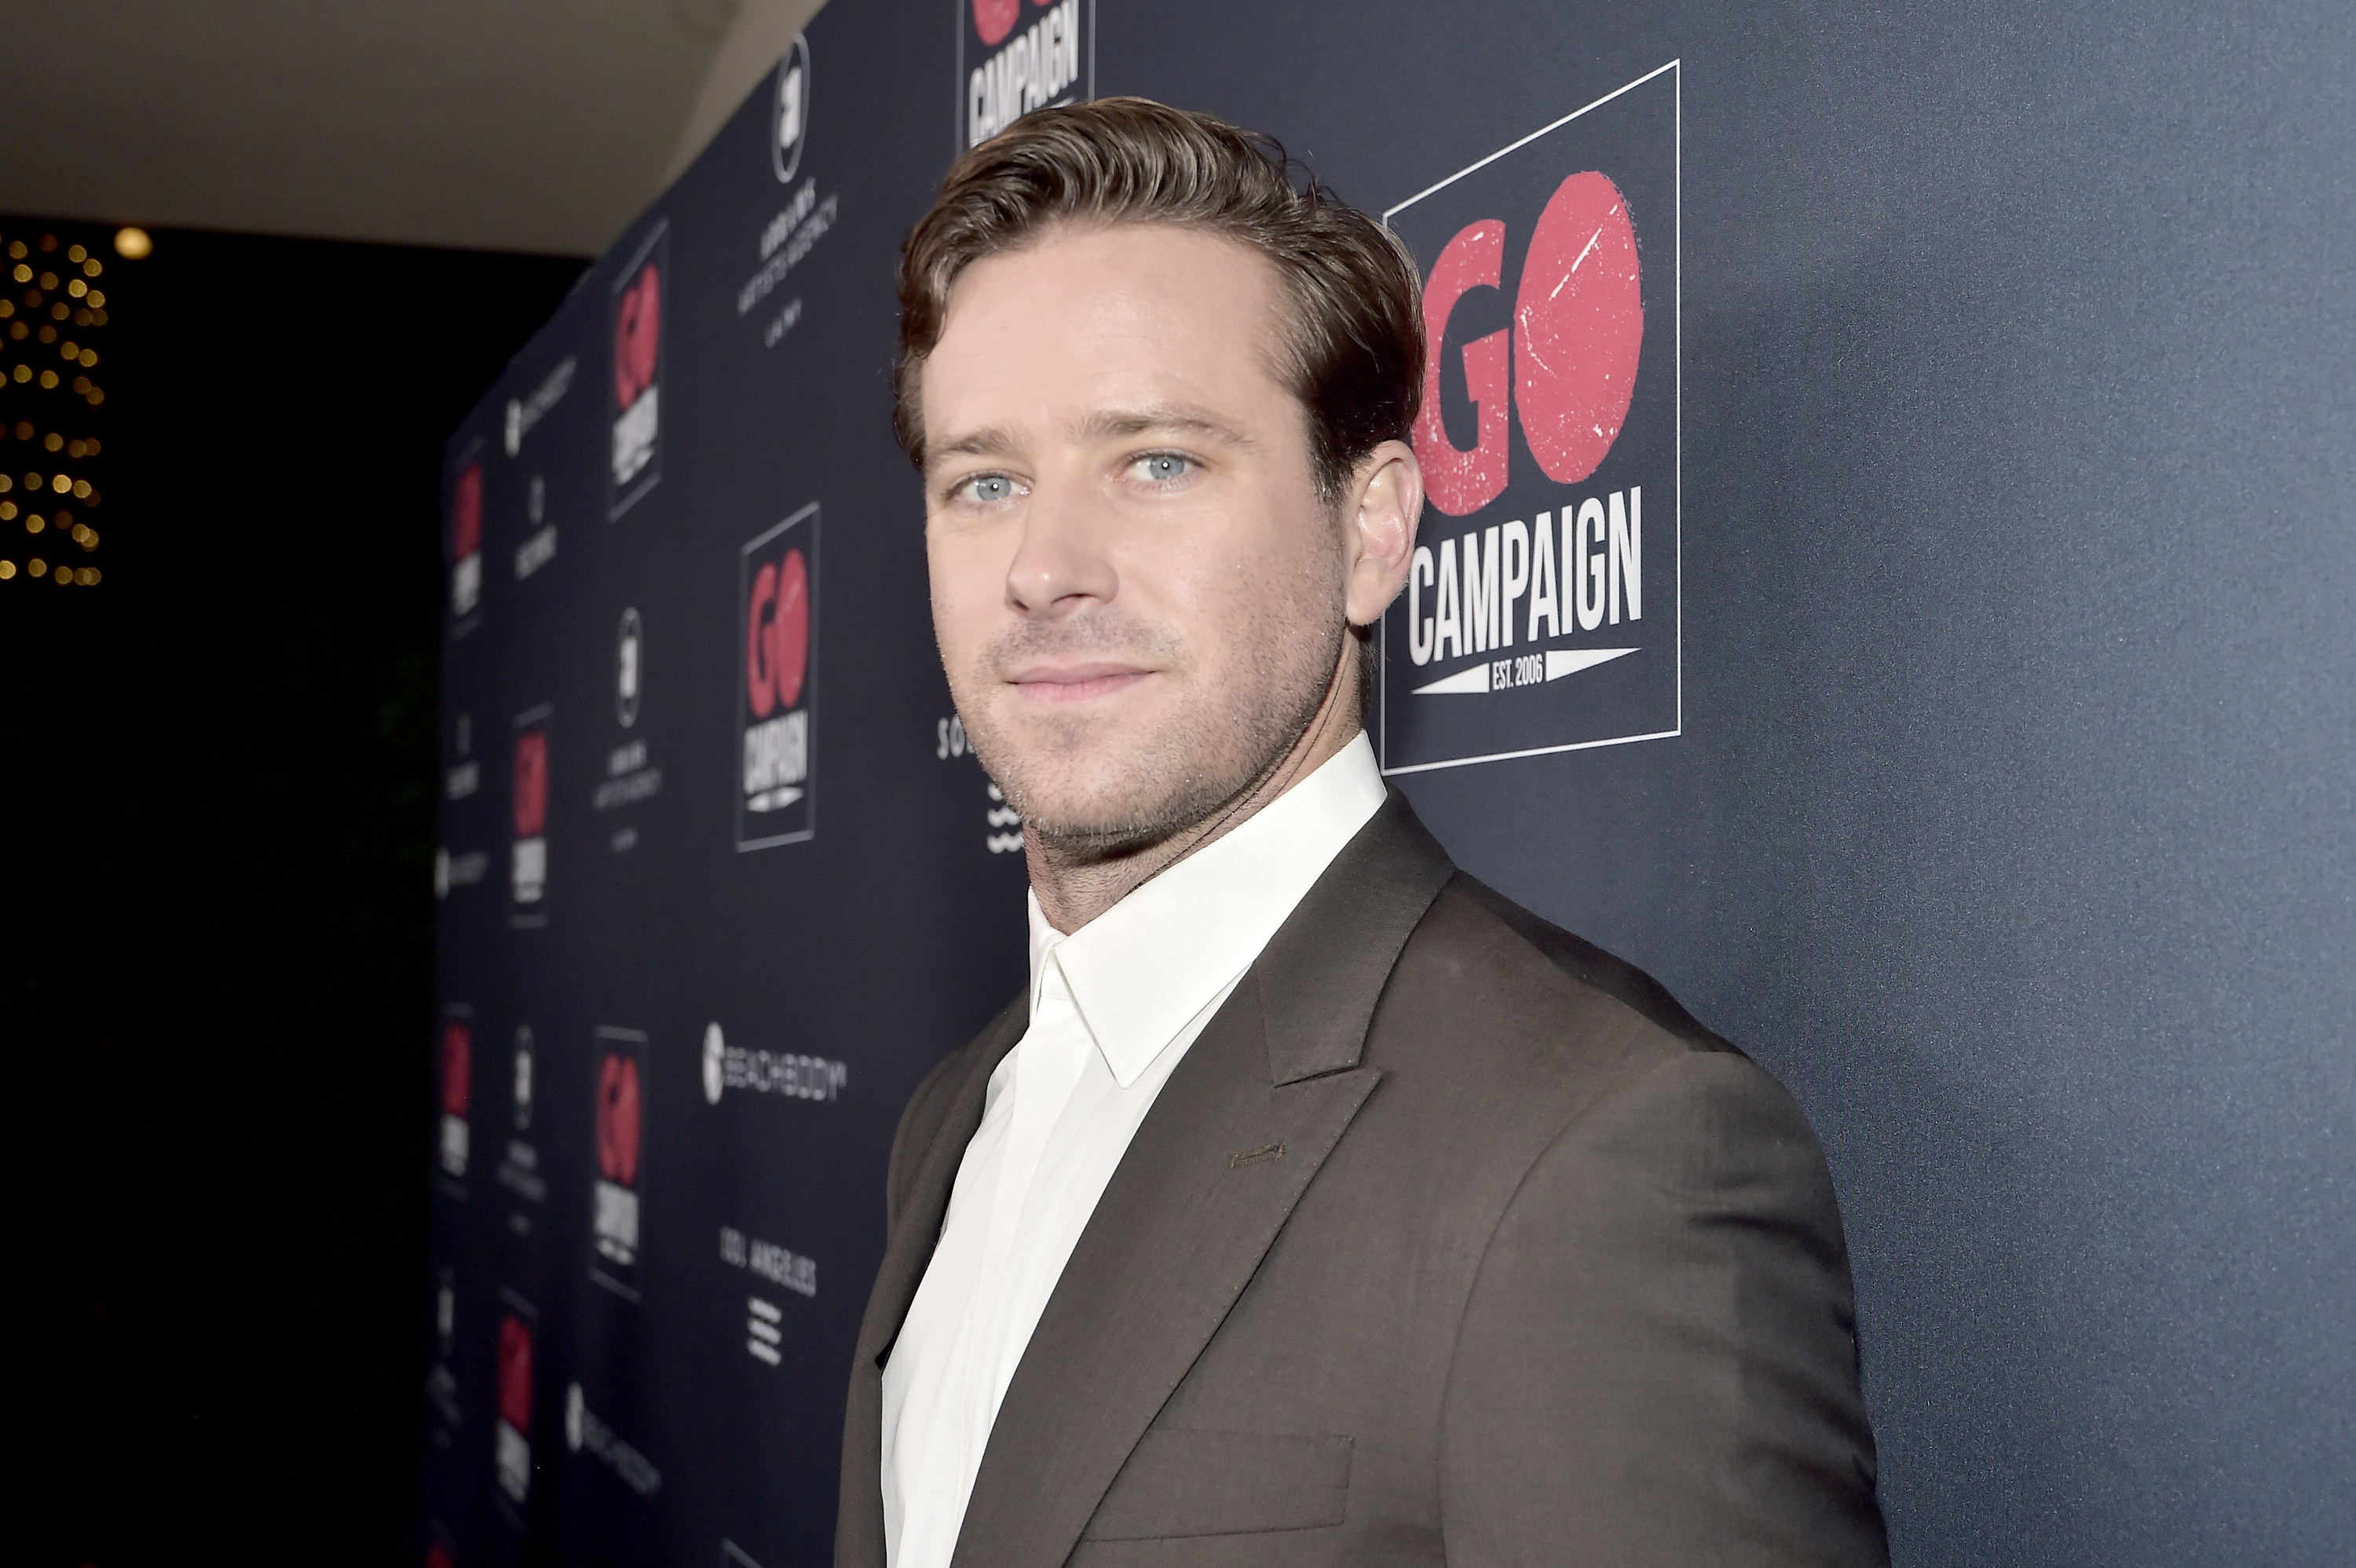 Armie attends an event